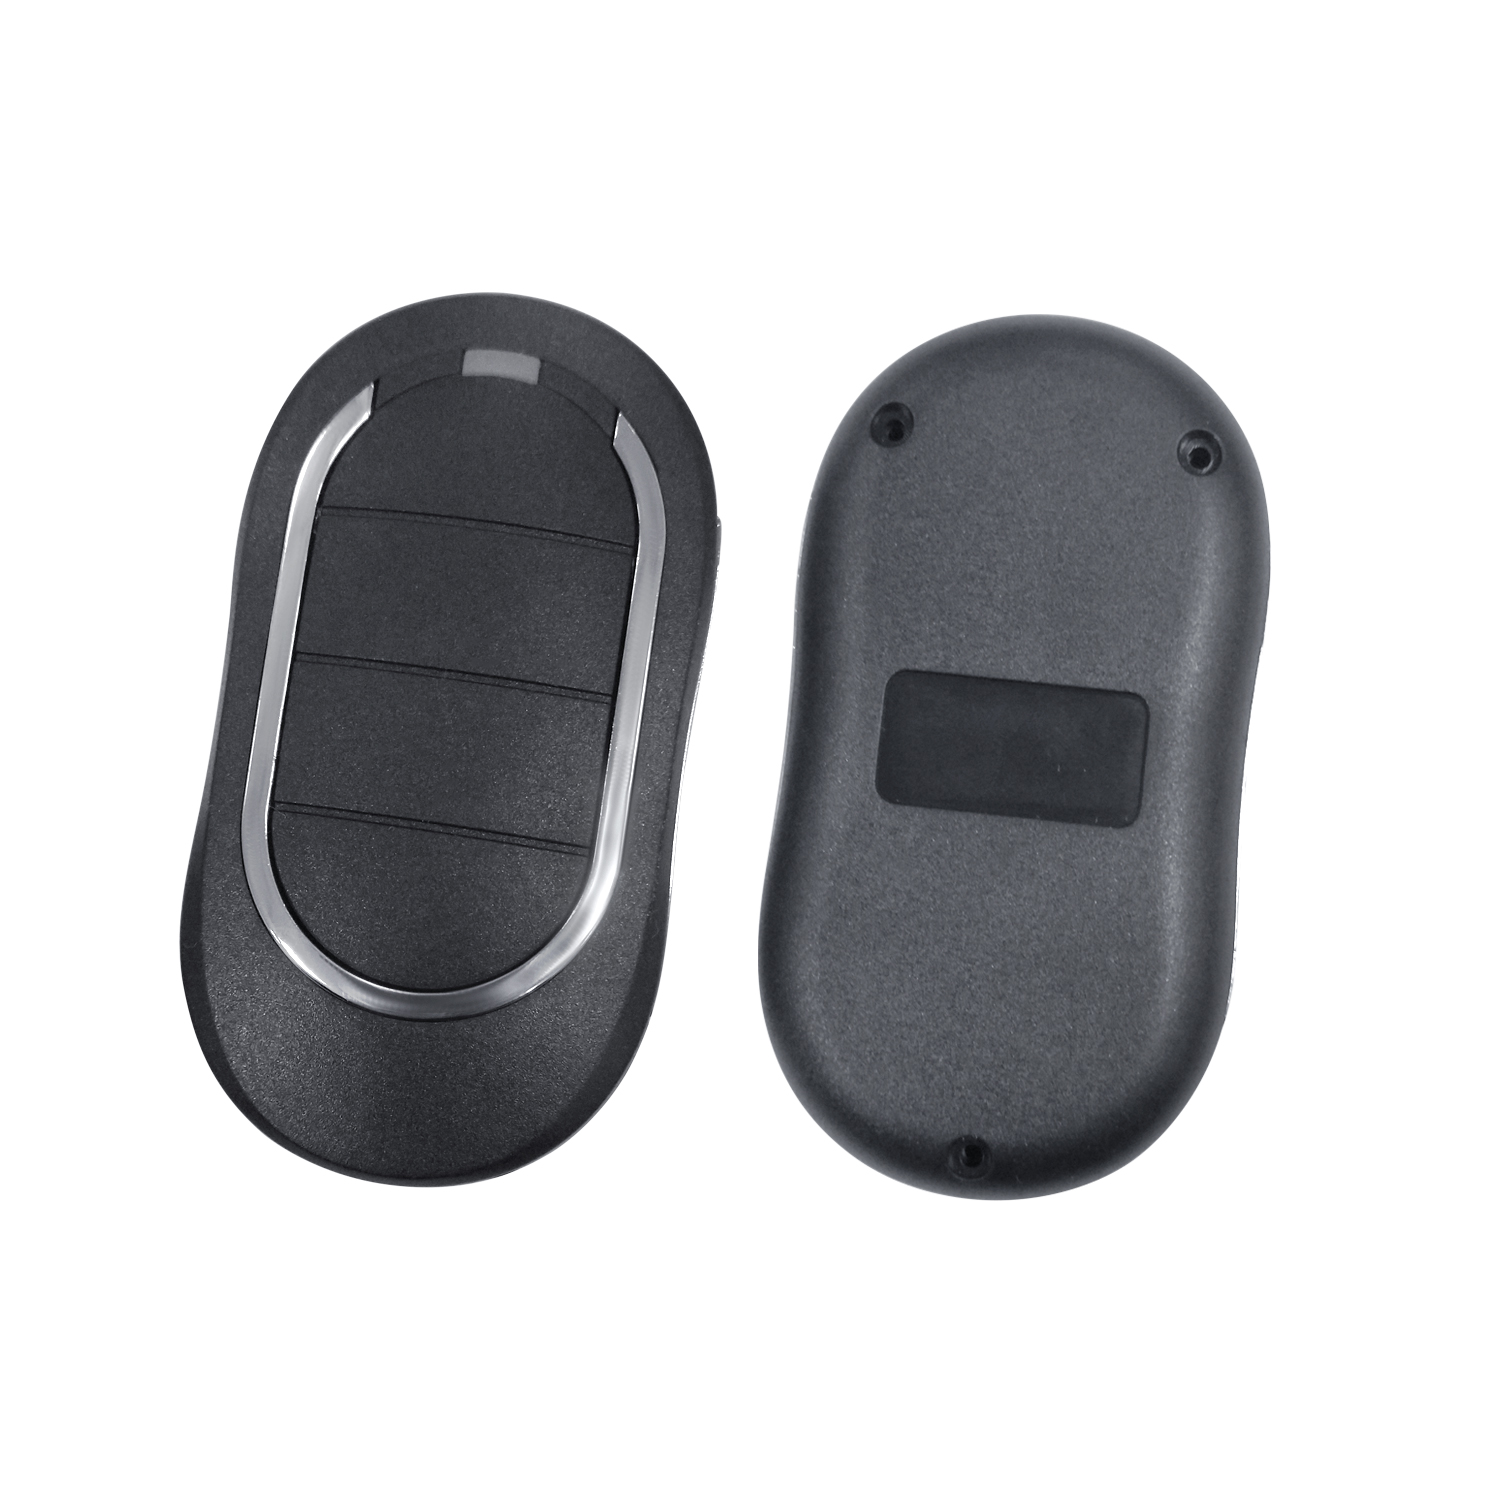 What are the main features to look for in an automatic gate remote control?